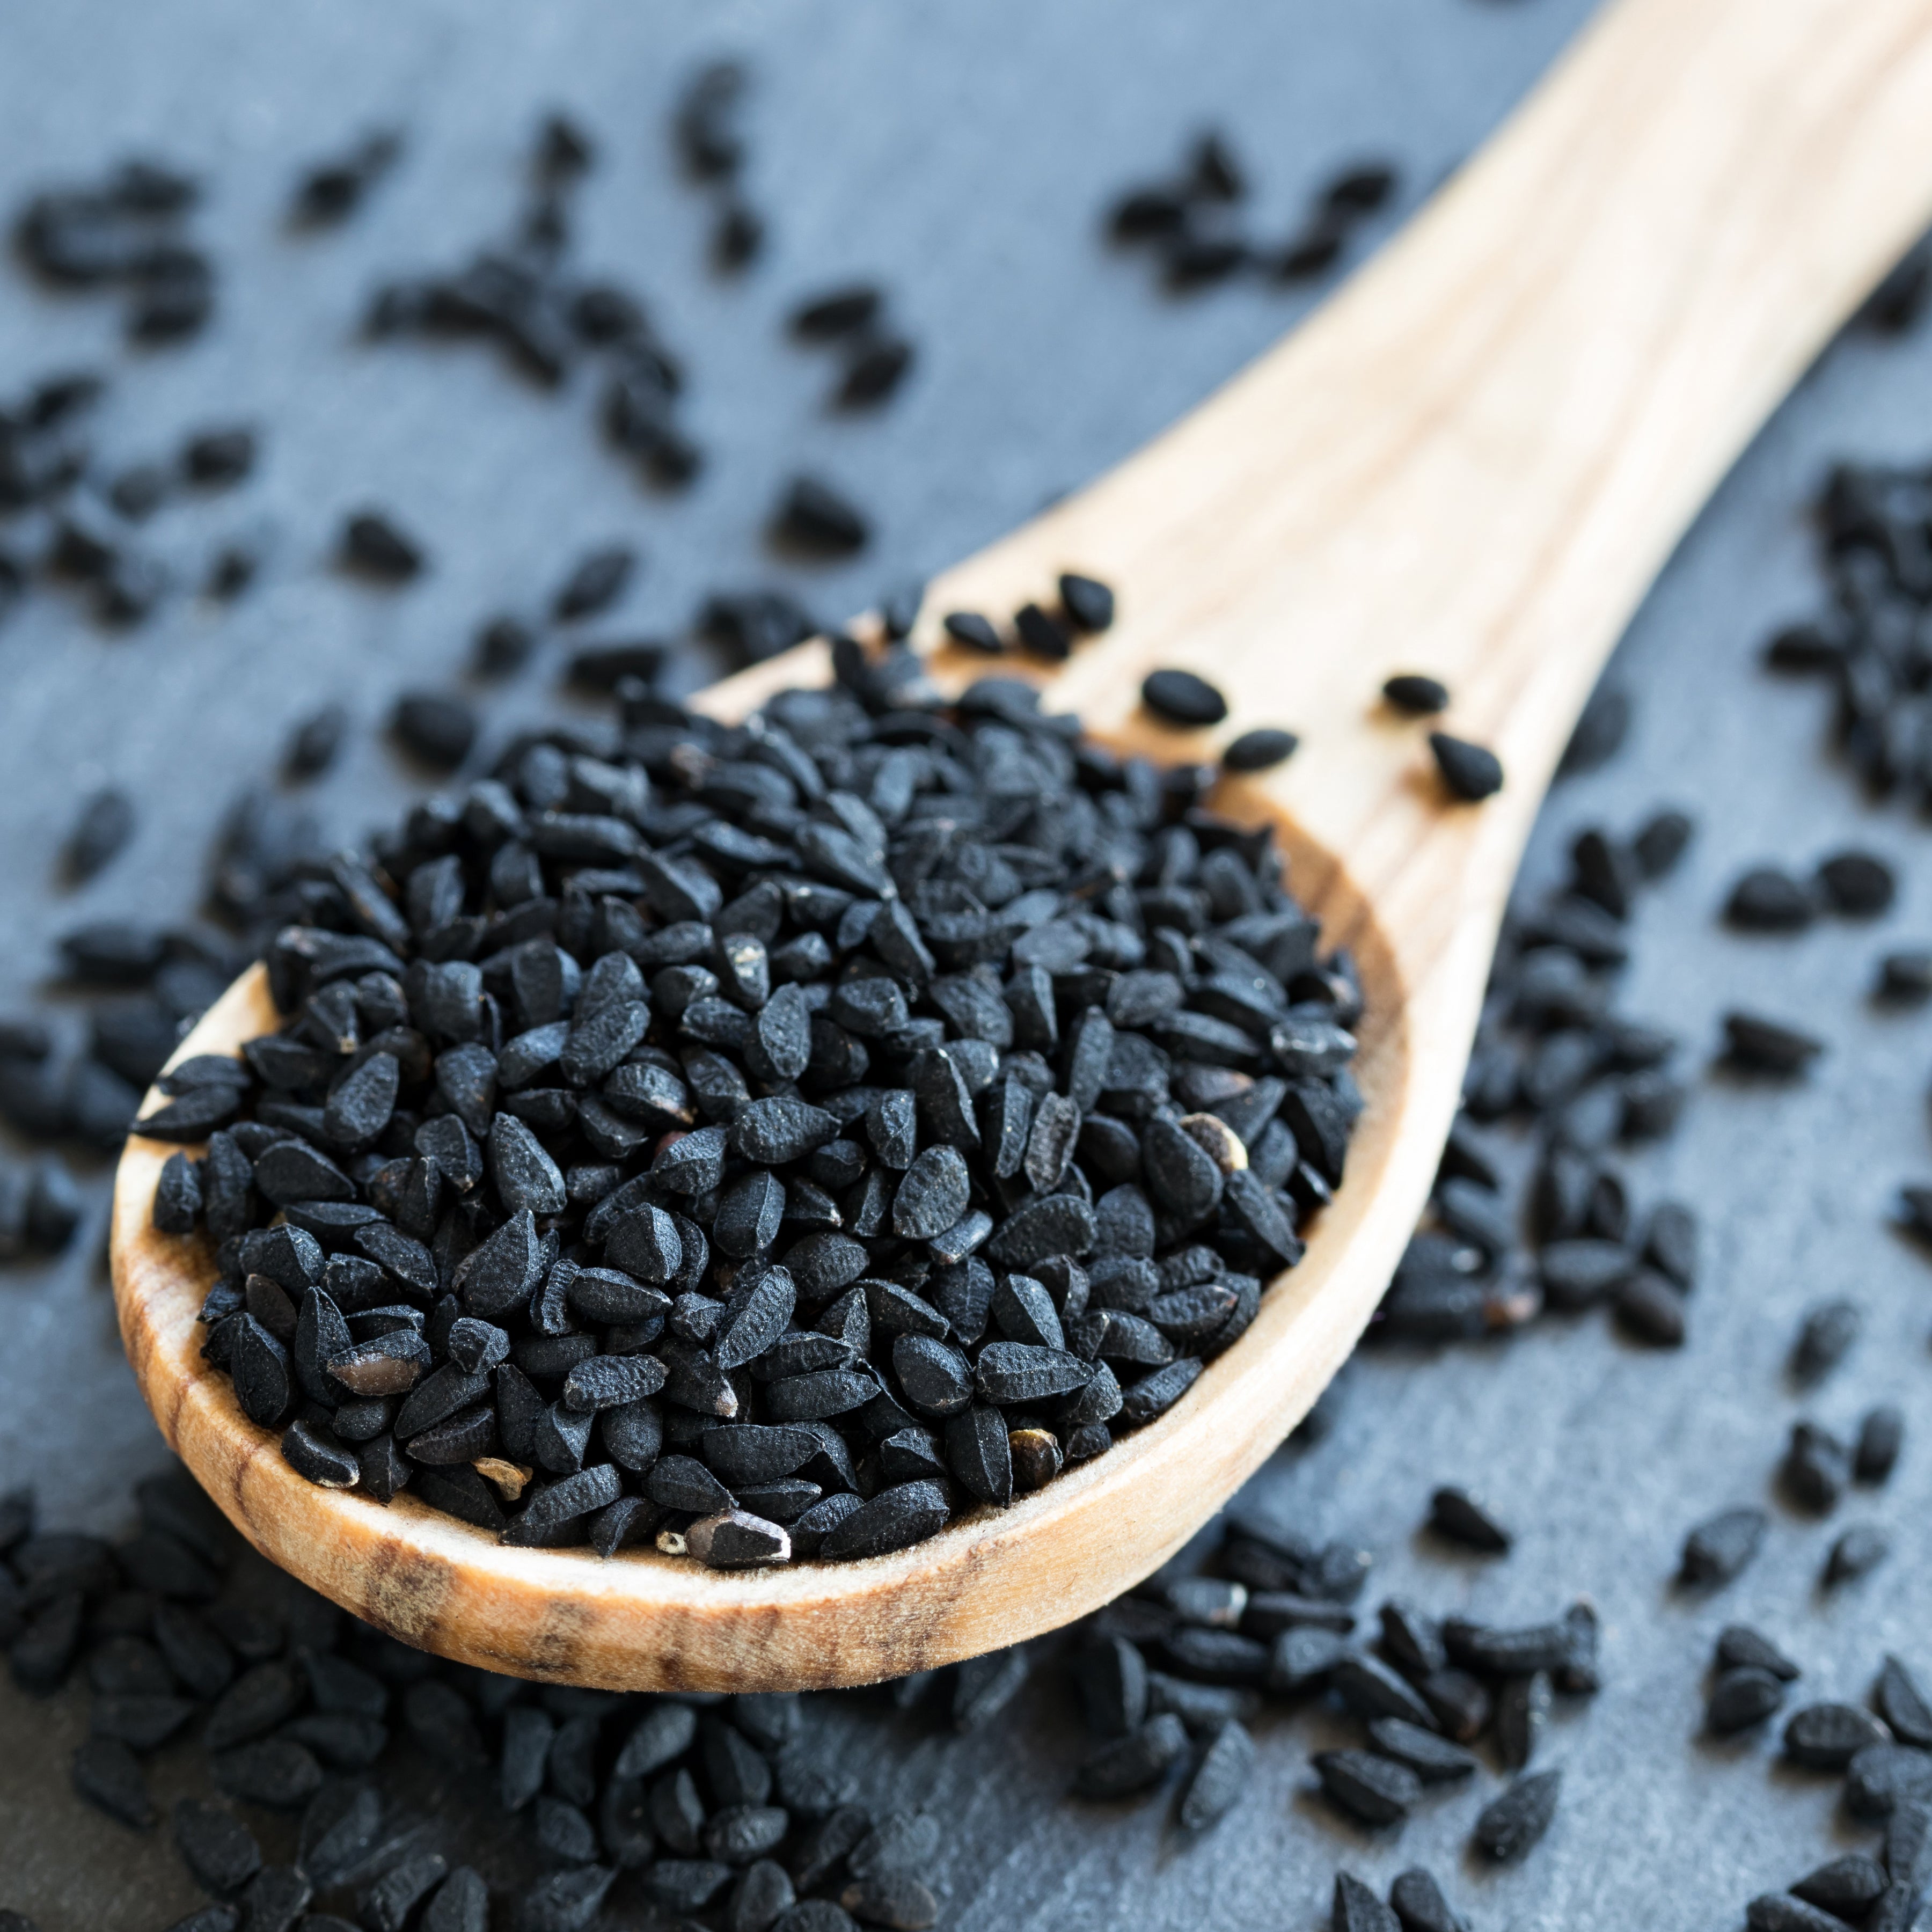 How To Use Black Seed Oil Kalonji For Hair Growth  Black Seed Oil  Benefits  How To Use Black Seed Oil Kalonji For Hair Growth  Black Seed  Oil Benefits It